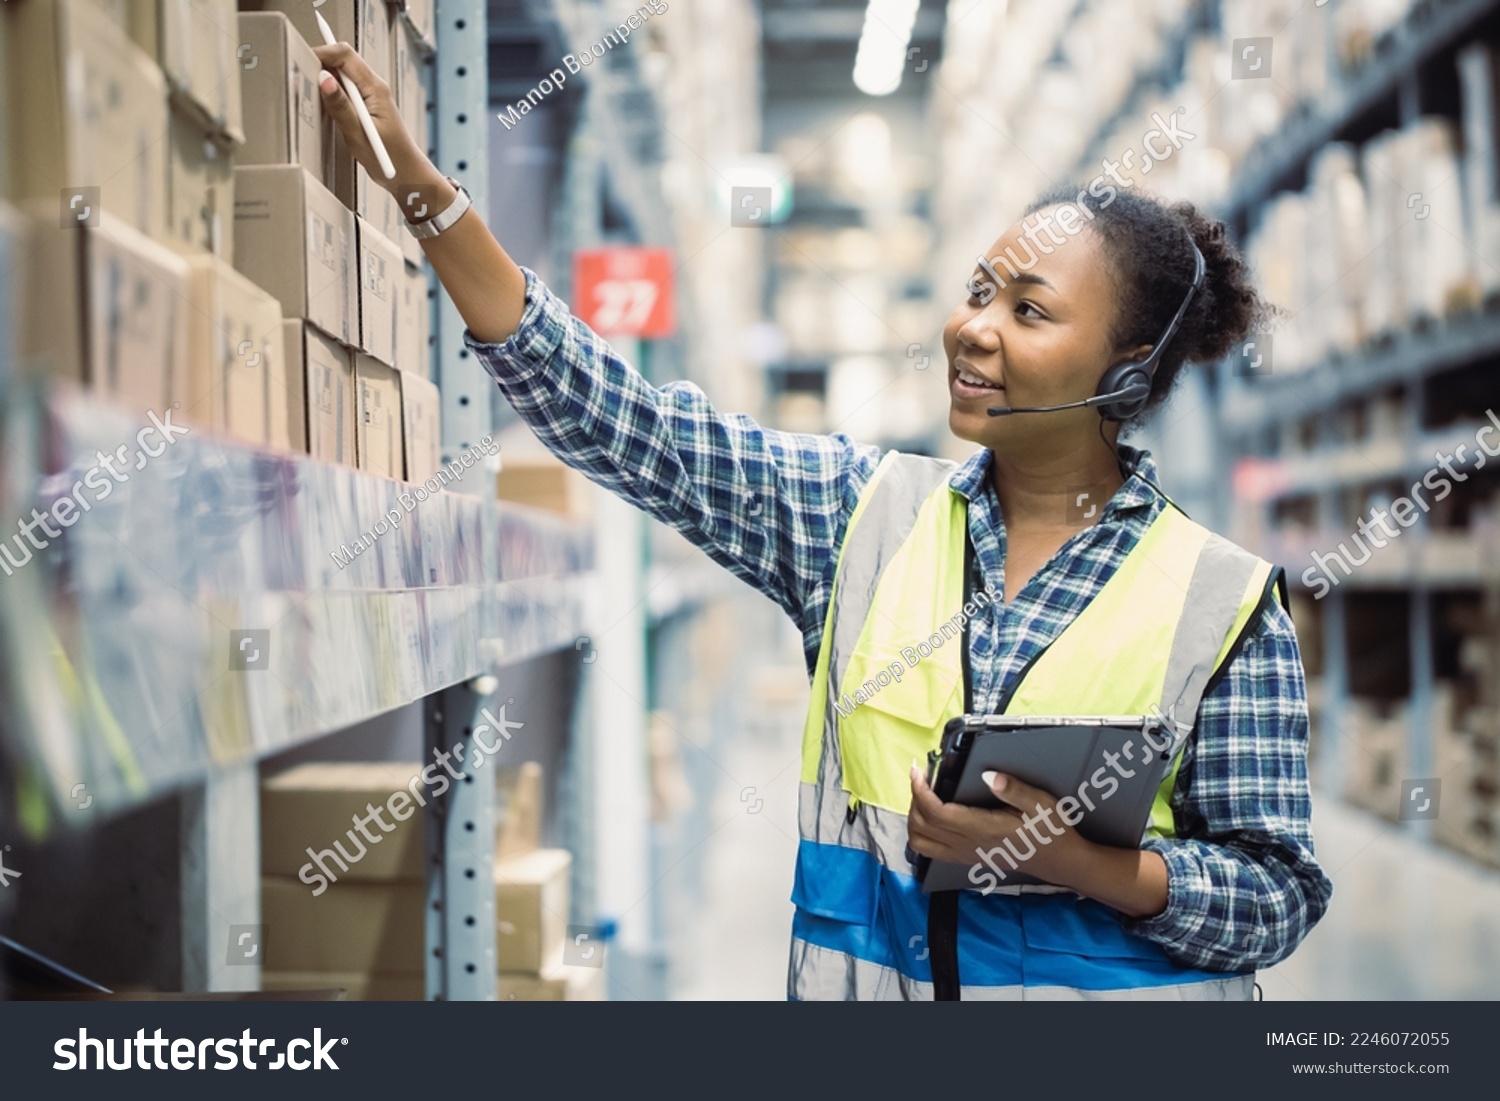 Portrait of young attractive African American woman auditor or trainee staff work looking up stocktaking inventory in warehouse store by computer tablet and headphones near products shelf. Call center #2246072055